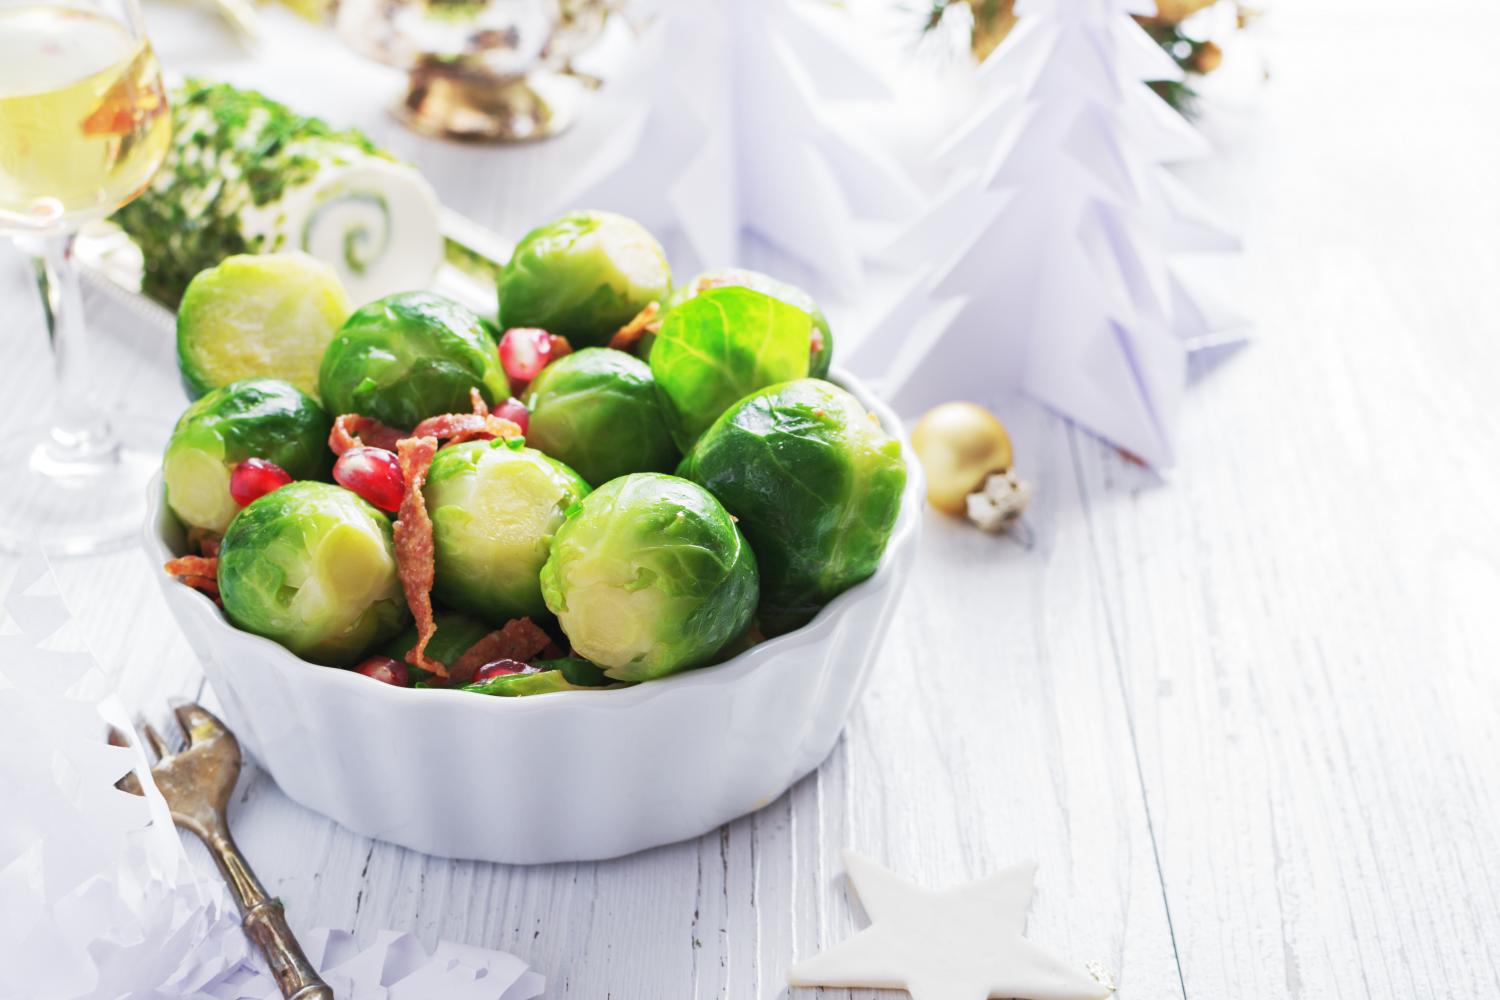 Nutrition tips for the holiday